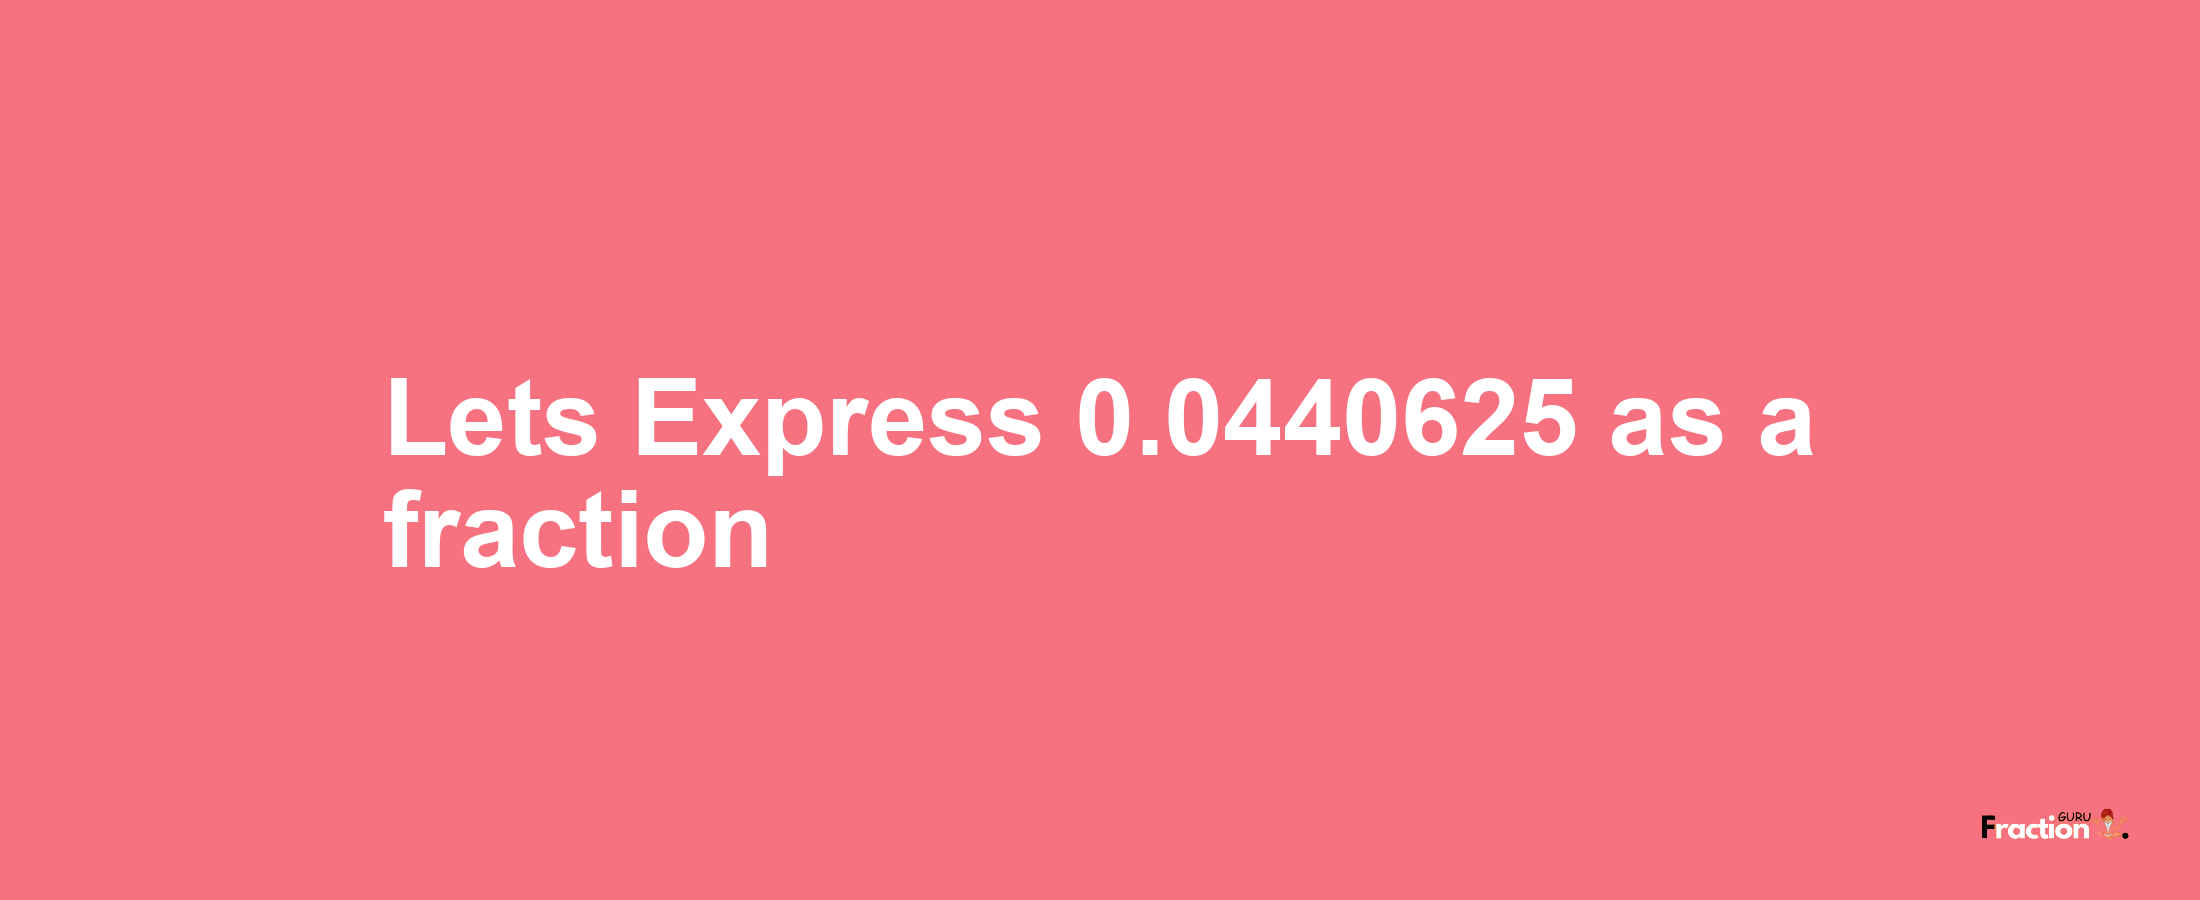 Lets Express 0.0440625 as afraction